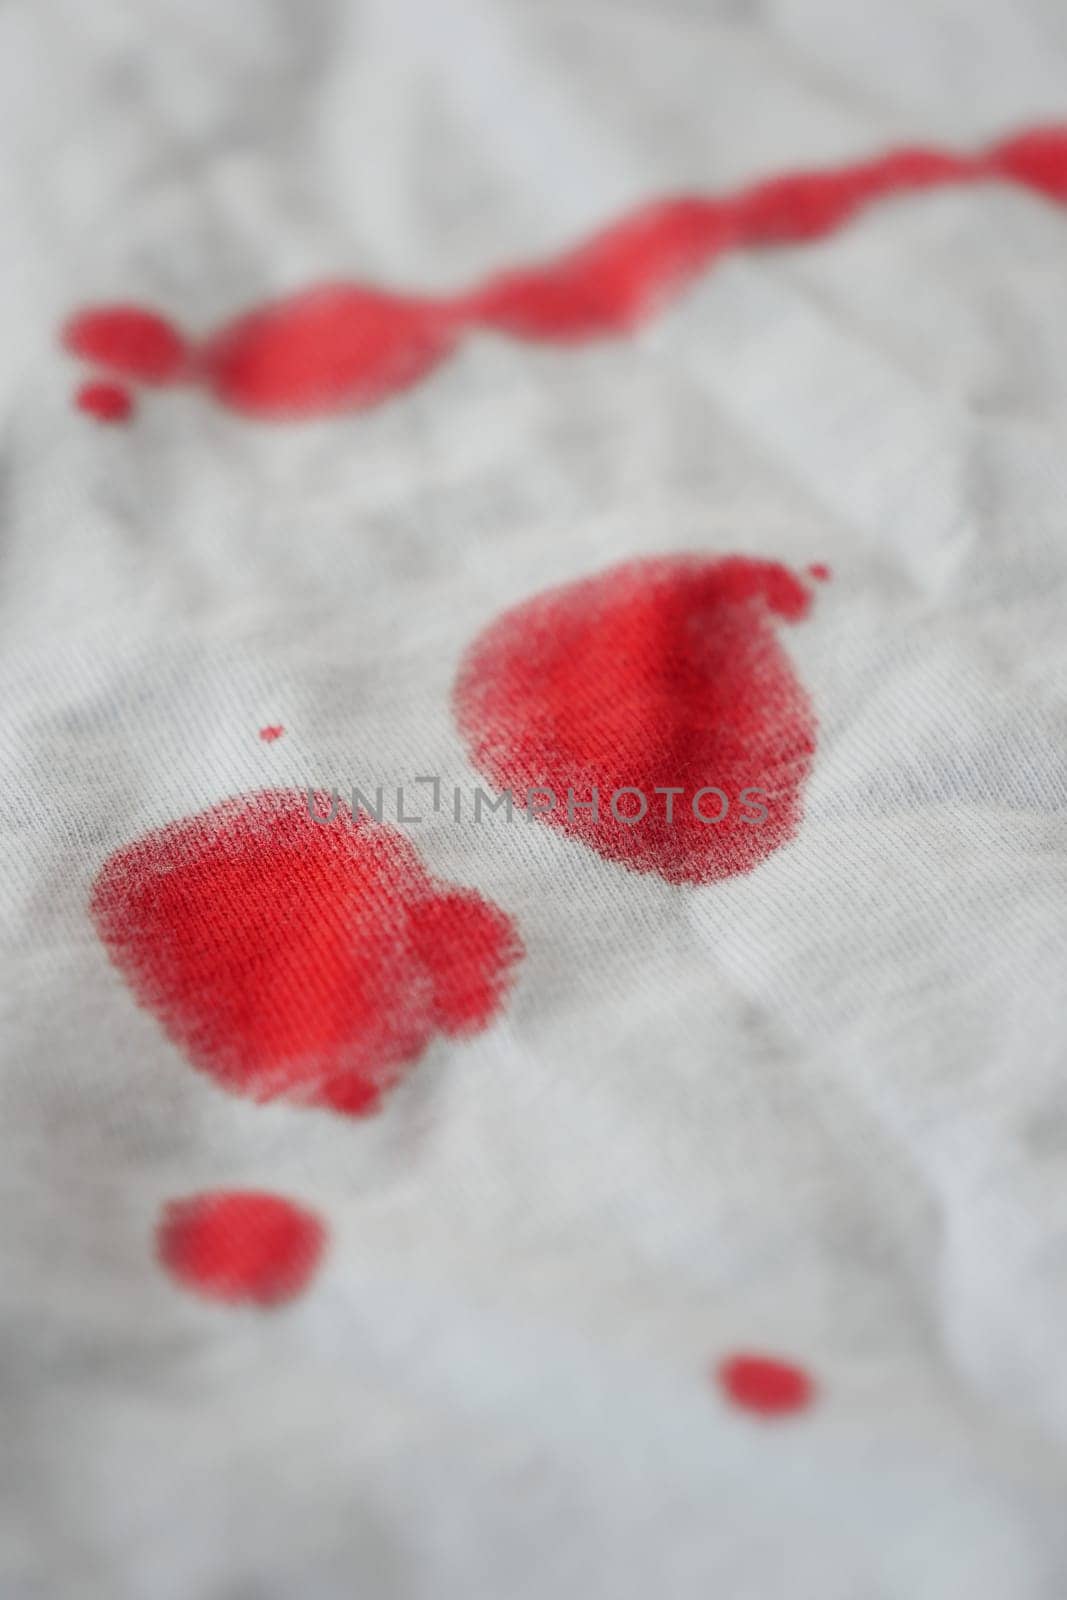 blood stains on a white shirt. by towfiq007